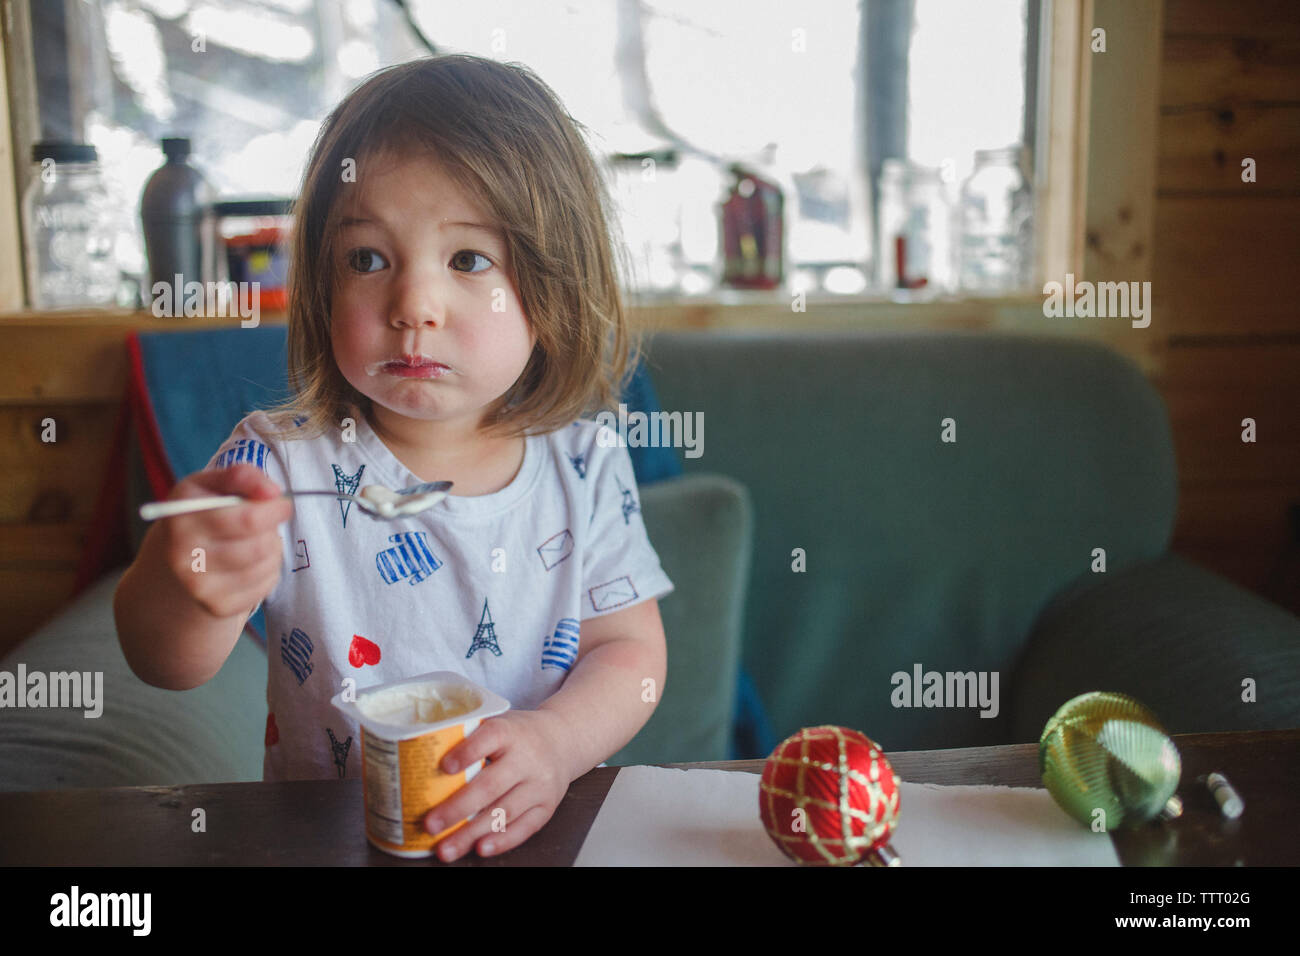 Portrait of a cute little Girl with messy bouche eating breakfast Banque D'Images